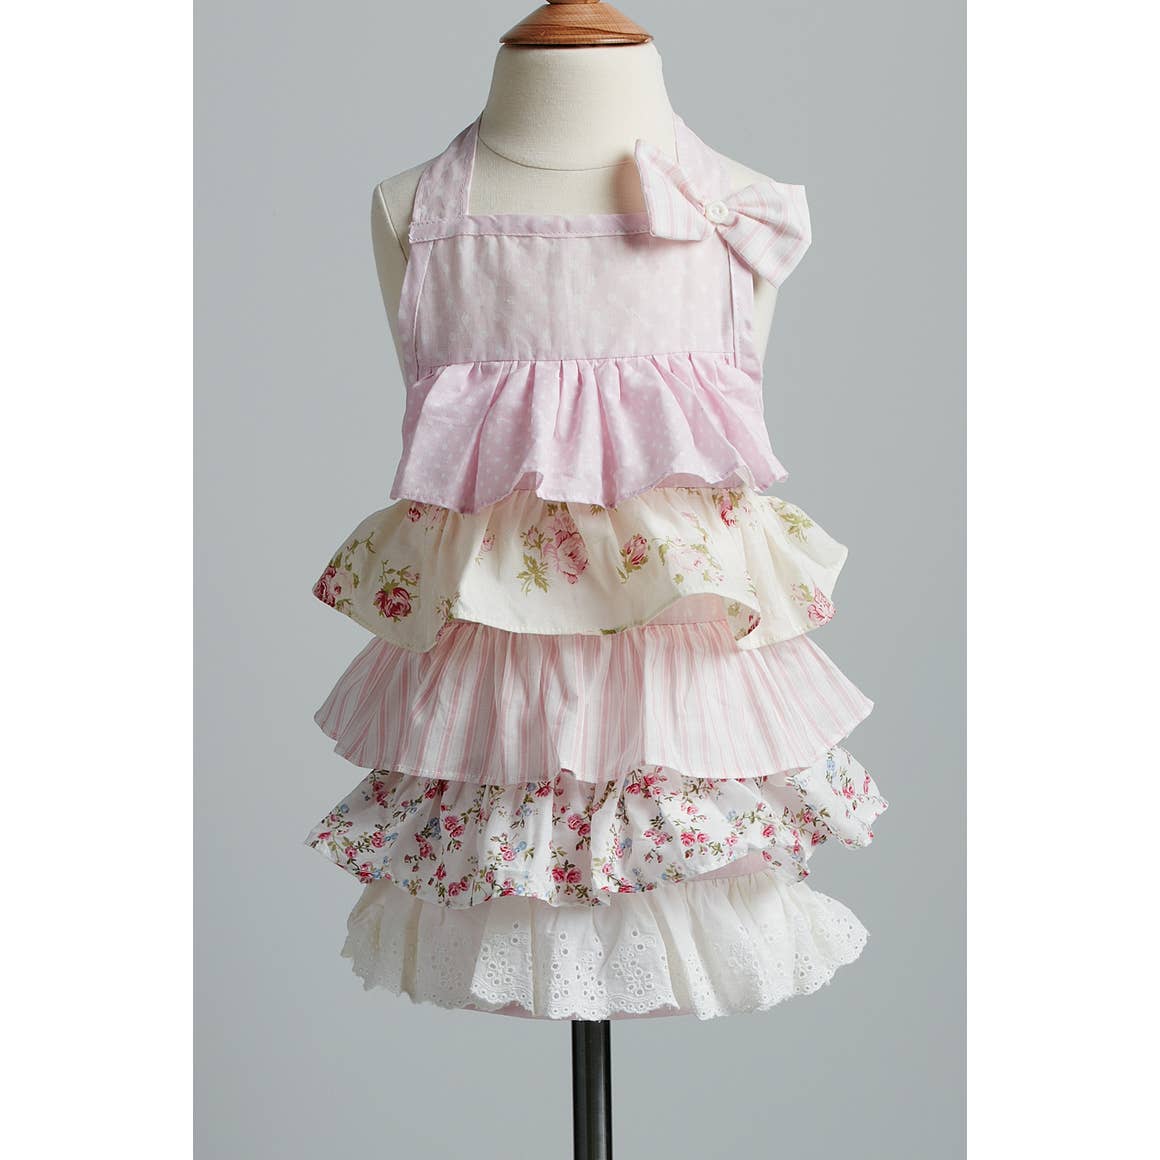 Children's Floral Pink and White Apron